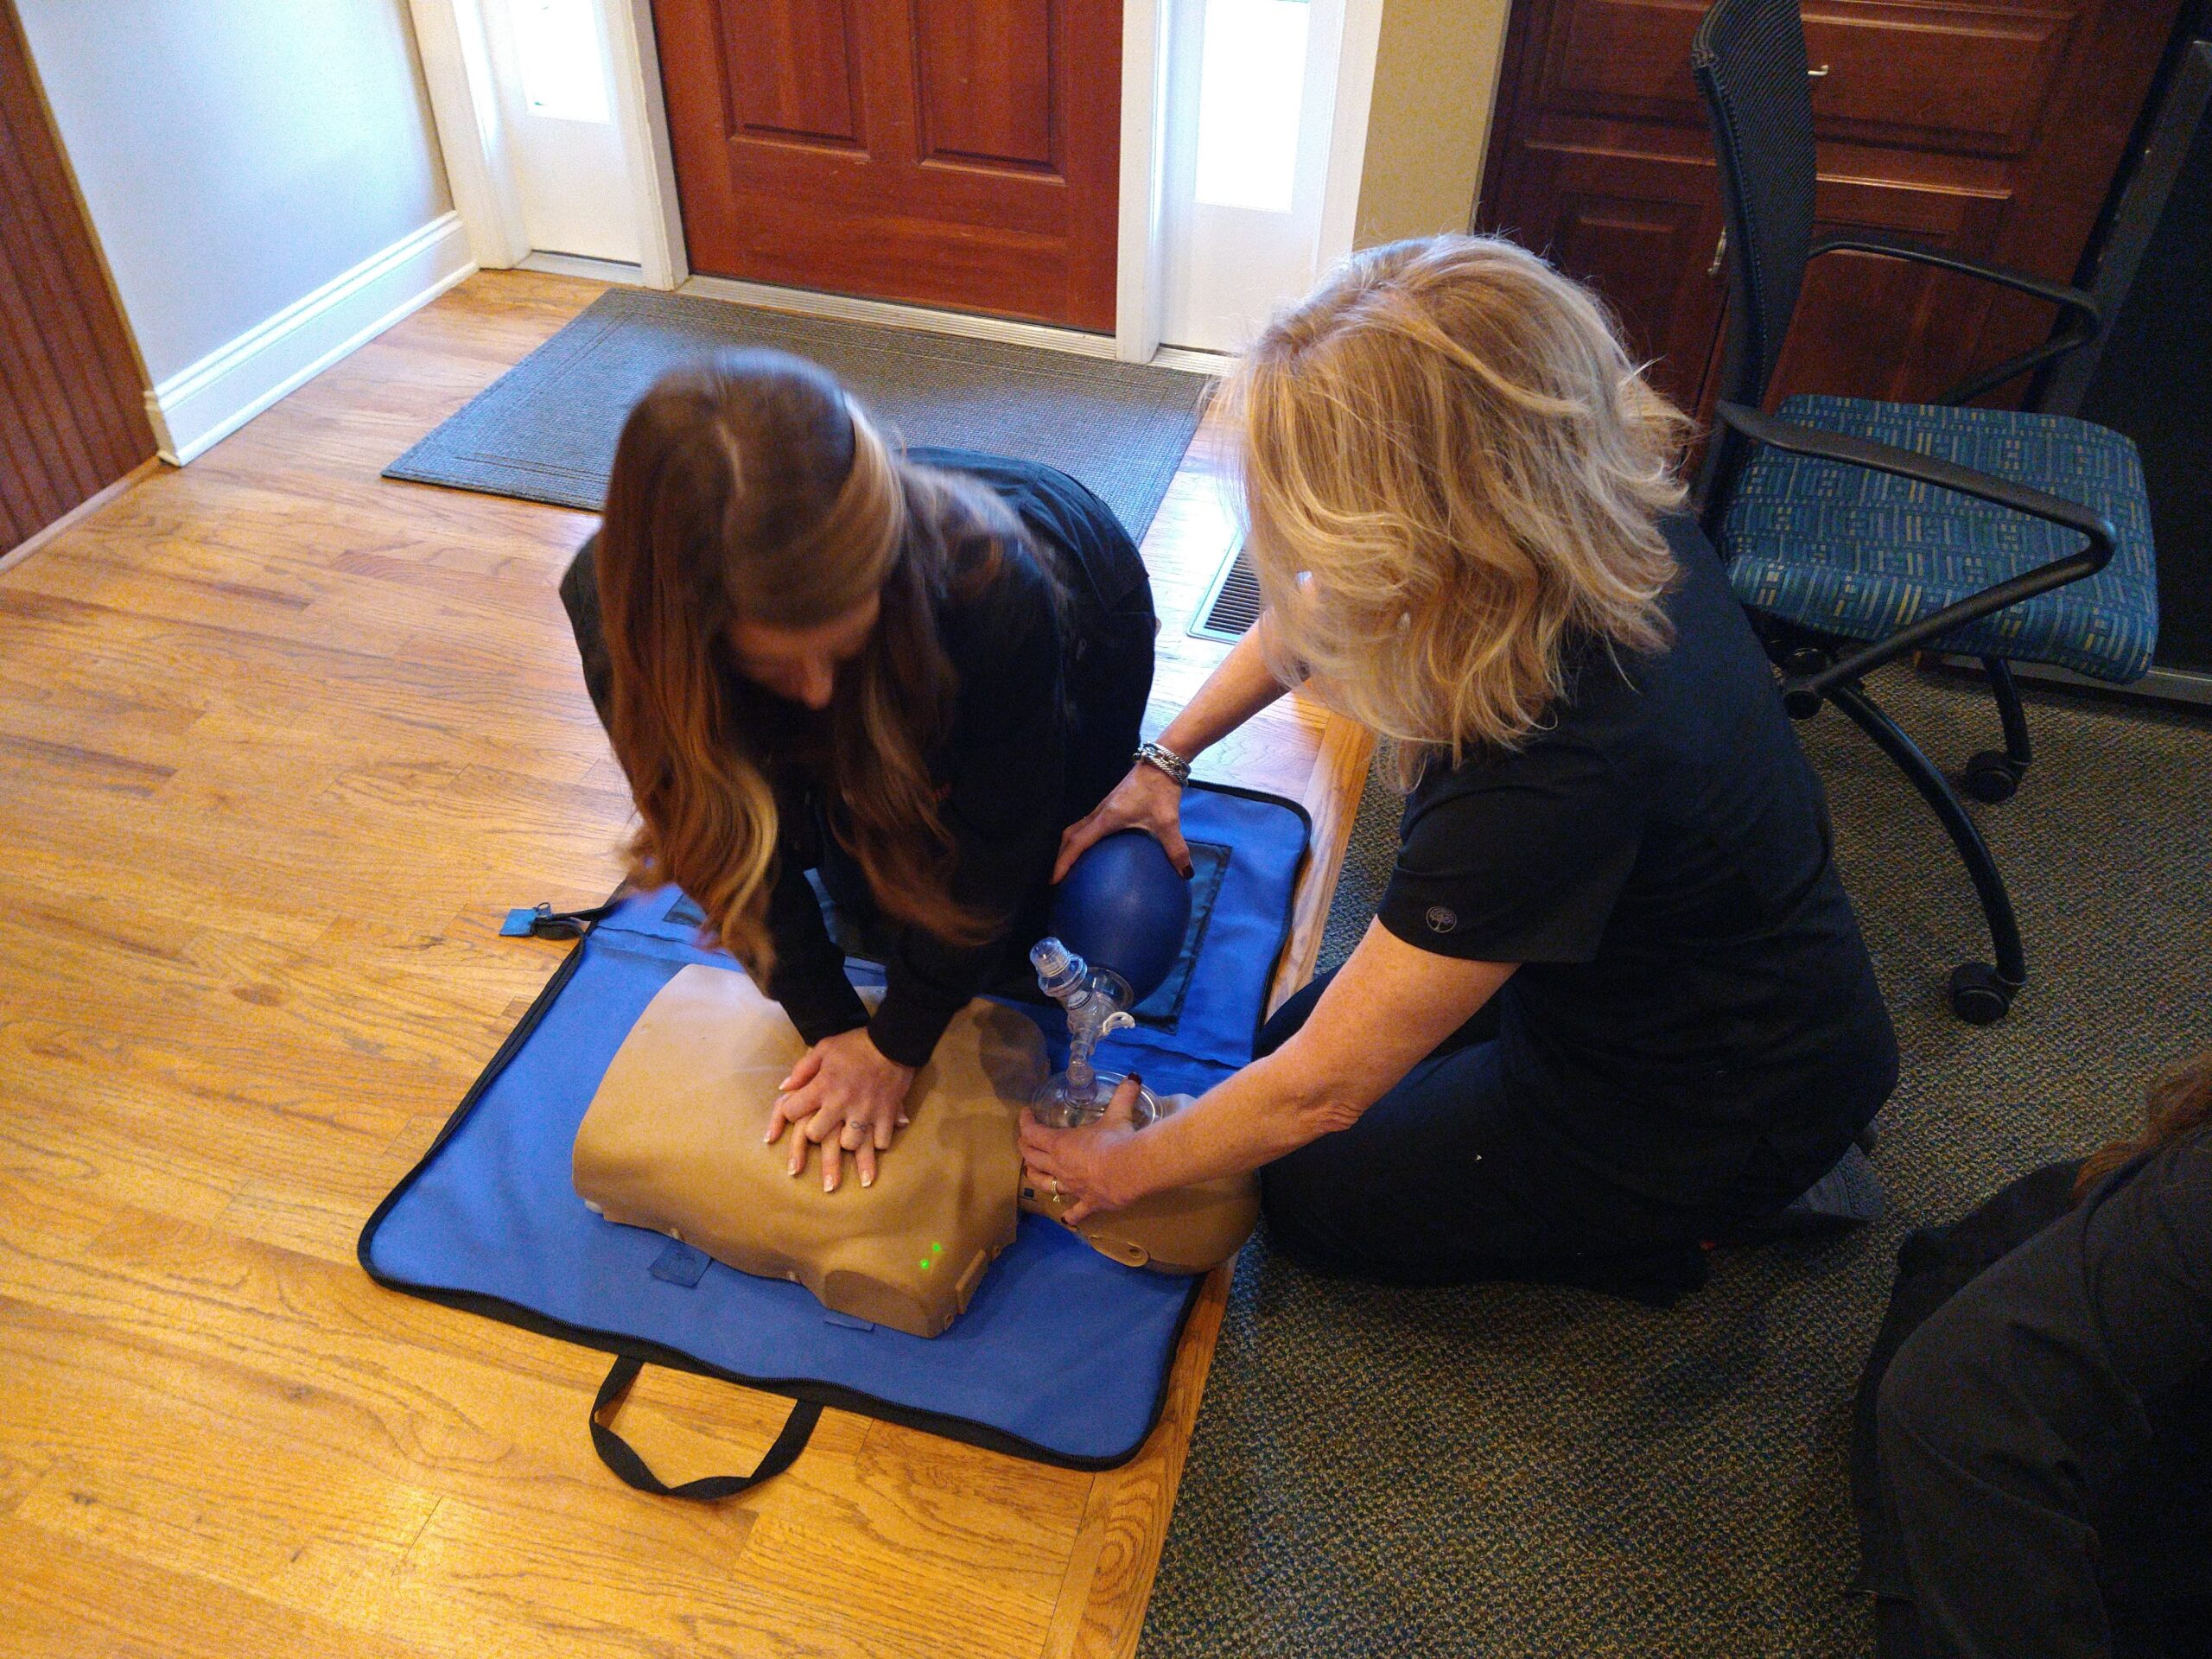 Why don’t more people know CPR?